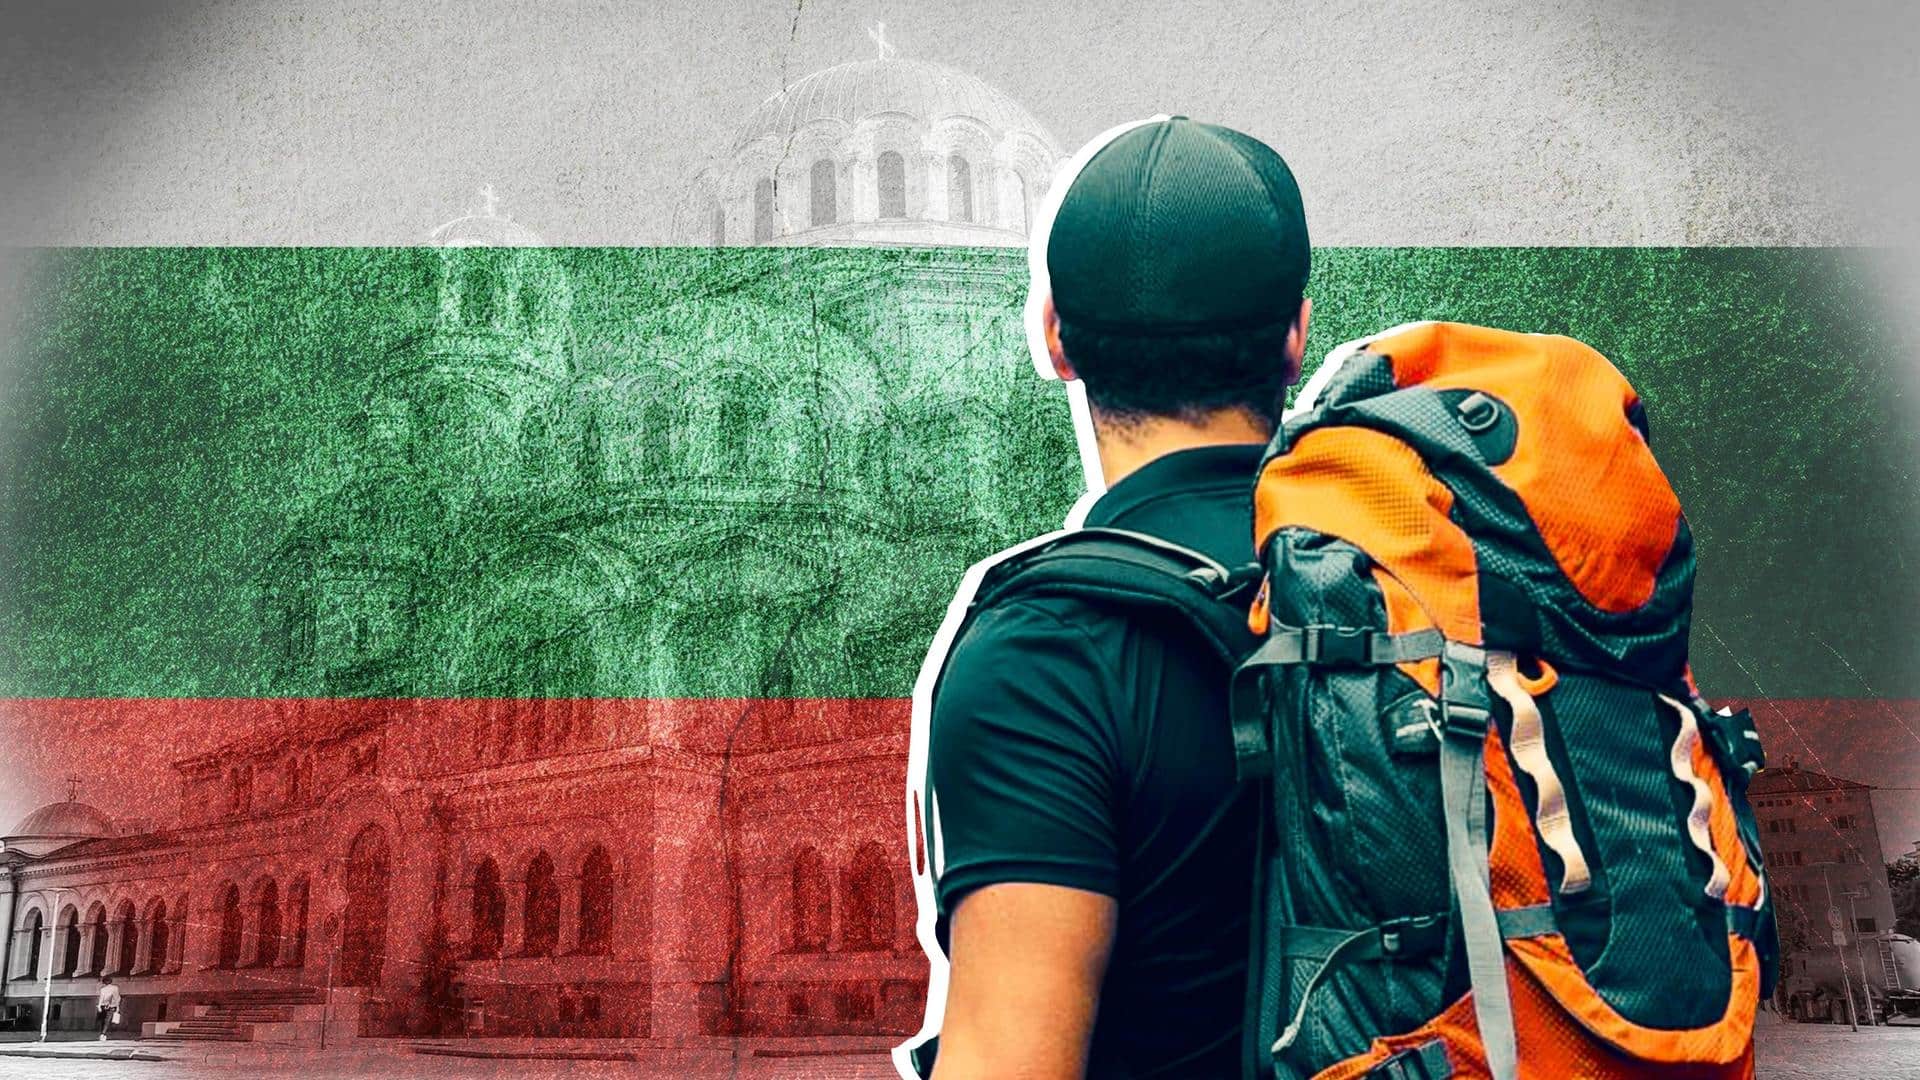 Traveling to Bulgaria? Here's what not to do